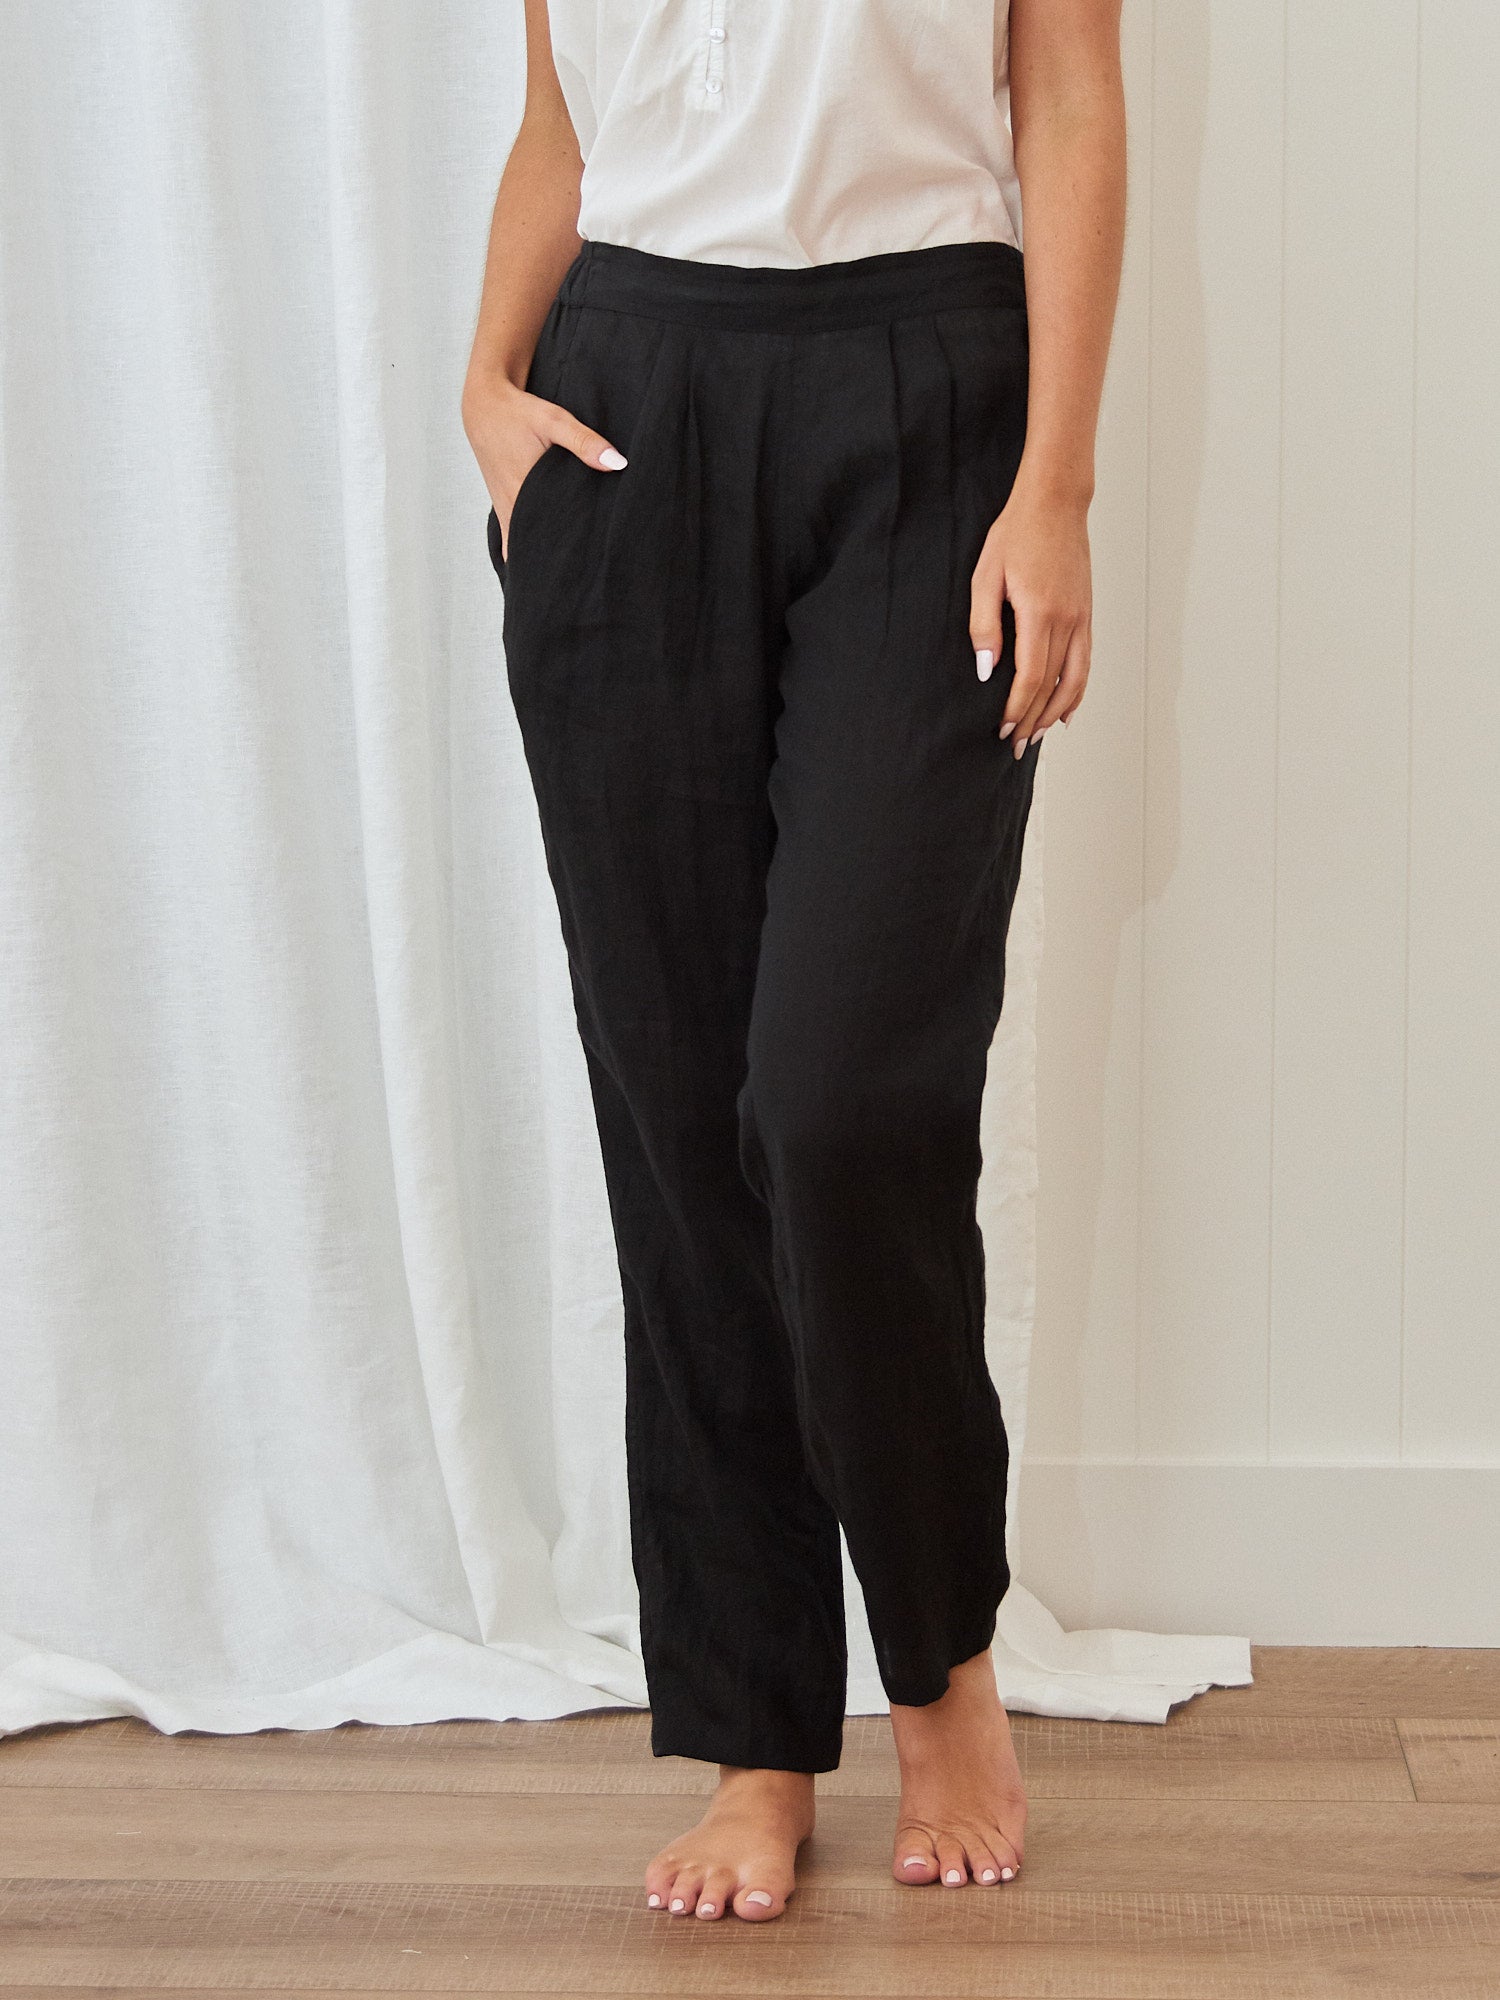 https://www.wallacecotton.com/content/products/voyager-linen-pants-black-1-9174.jpg?width=1500